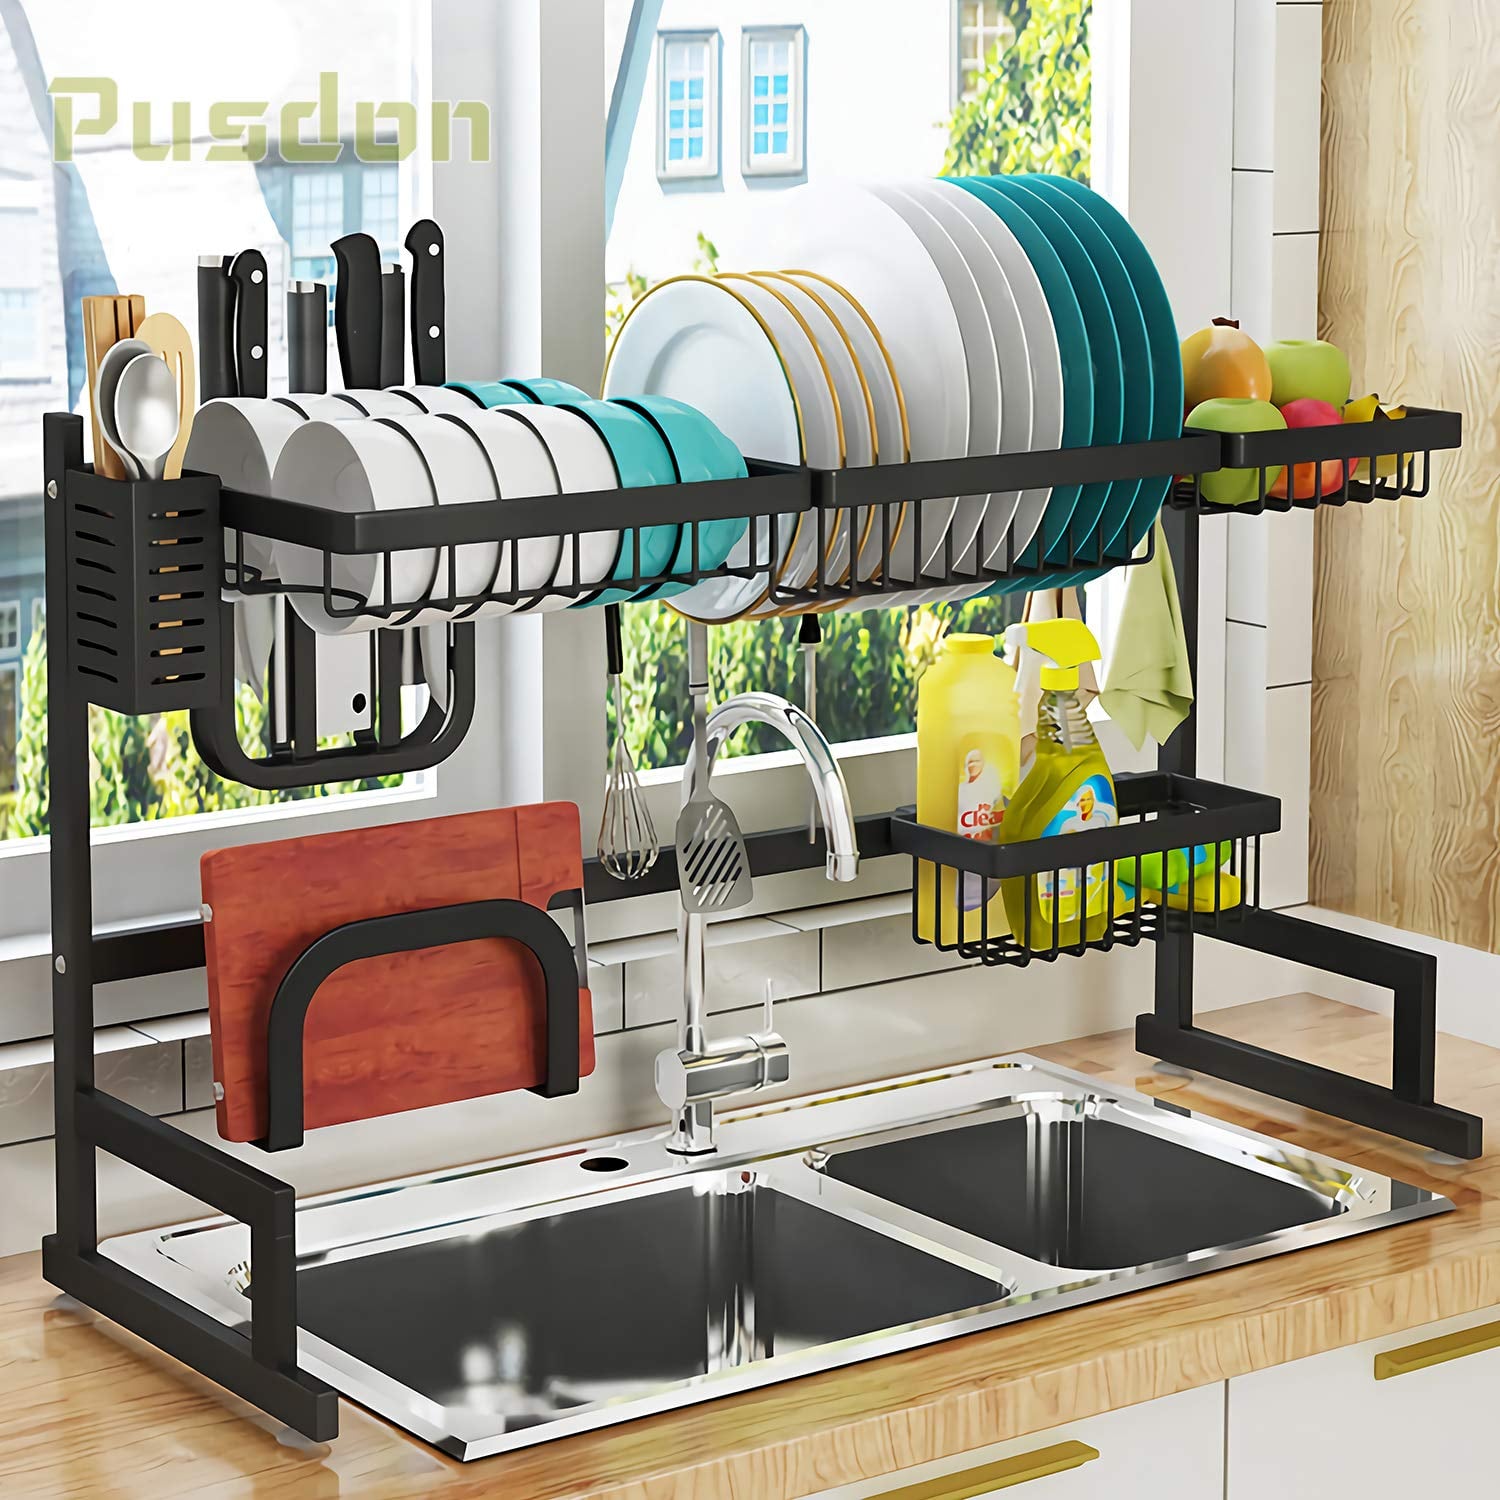 Kitchen Products For Small Spaces From Amazon Popsugar Smart Living Uk